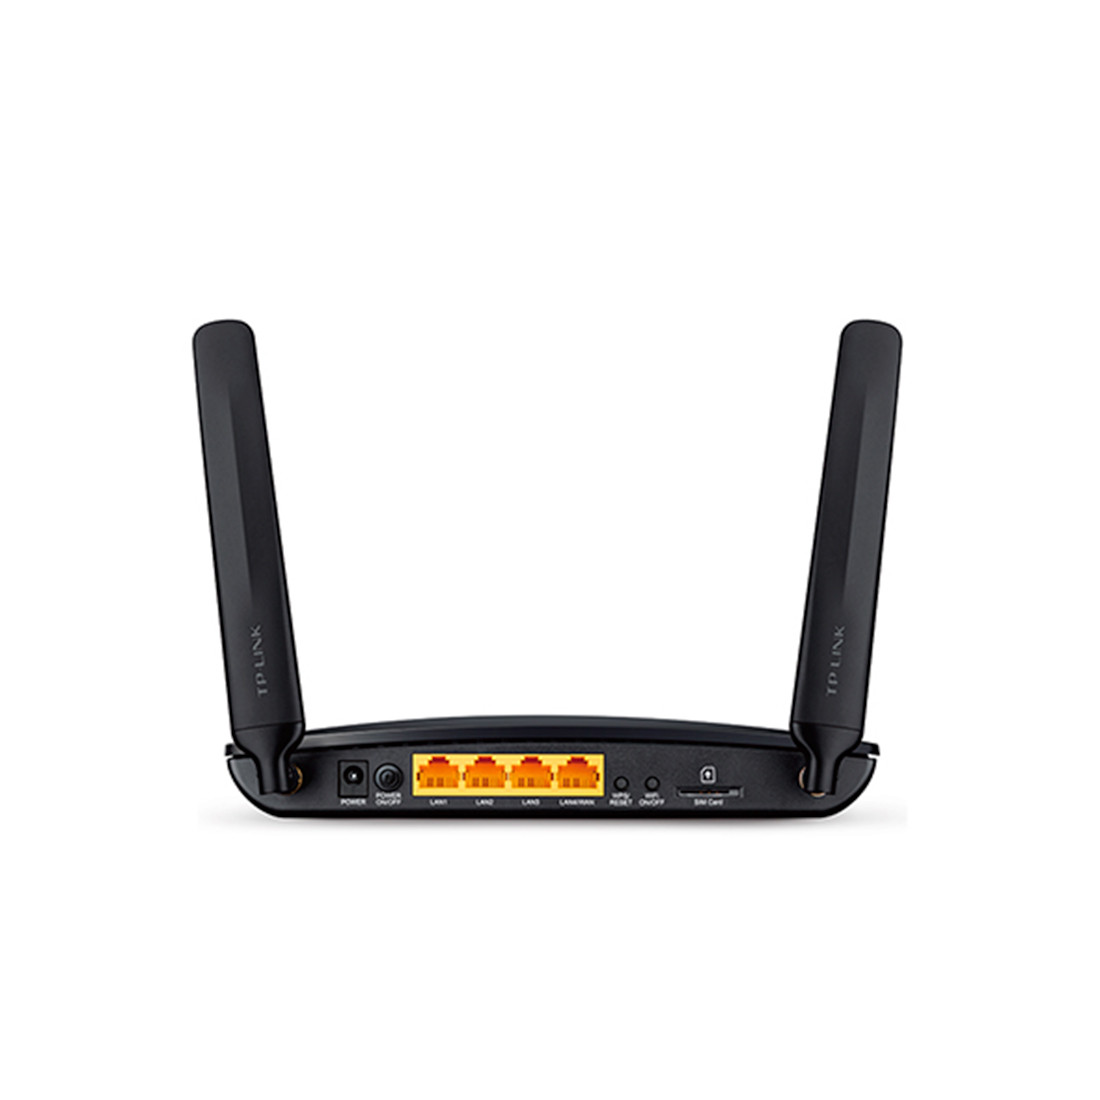 TP-LINK TL-MR6400 Маршрутизатор LTE N300 4G - фото 2 - id-p75208224